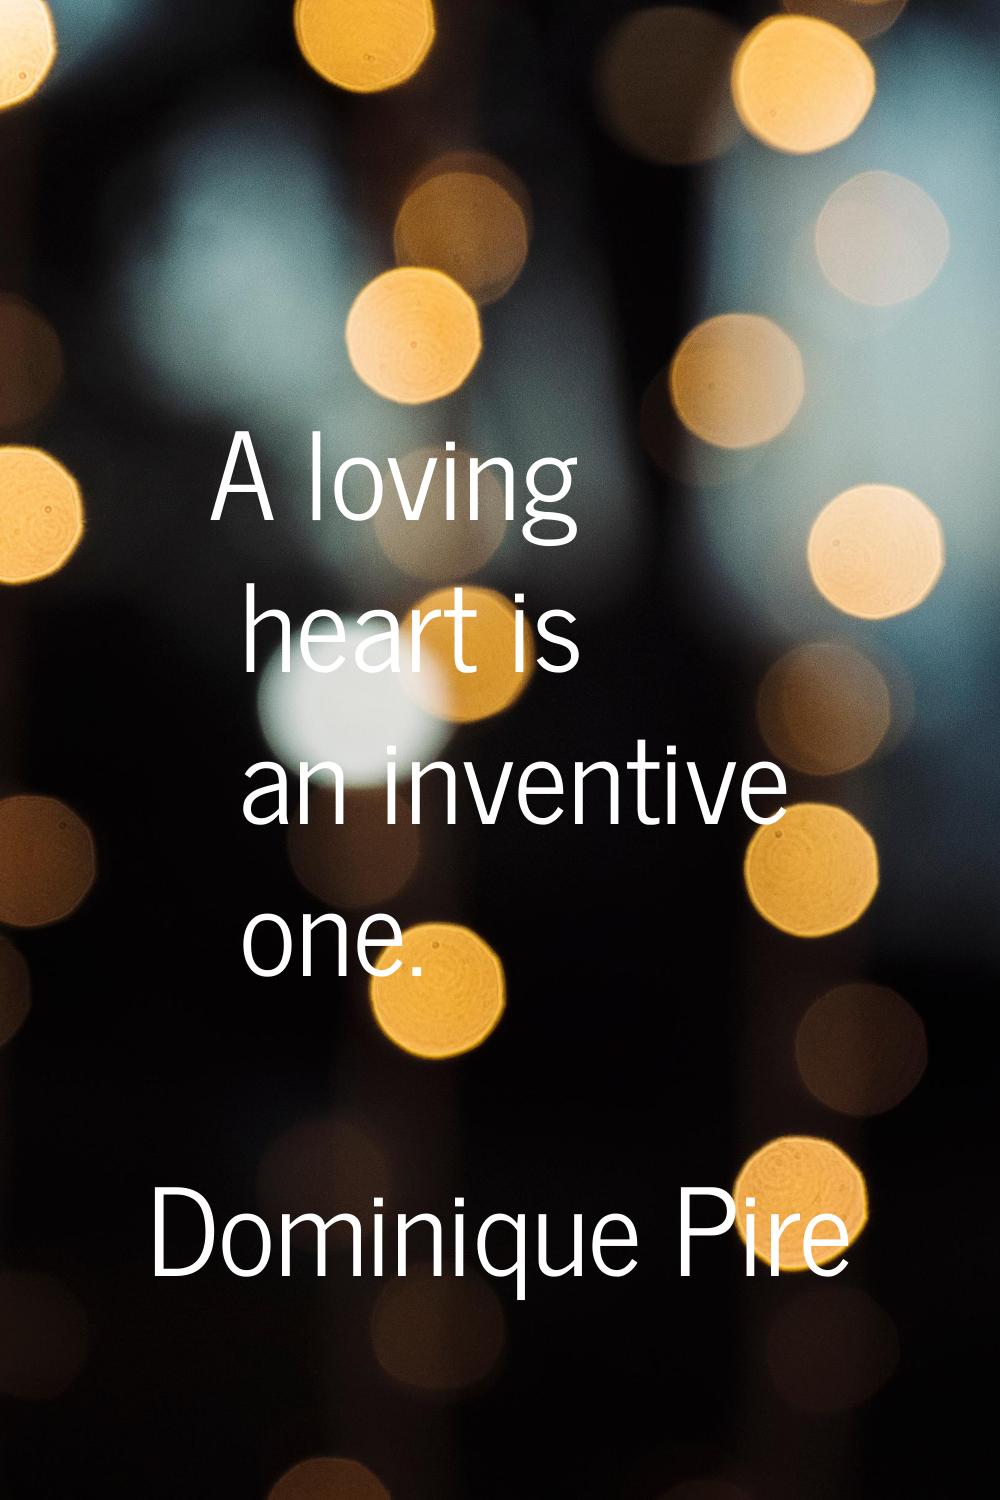 A loving heart is an inventive one.